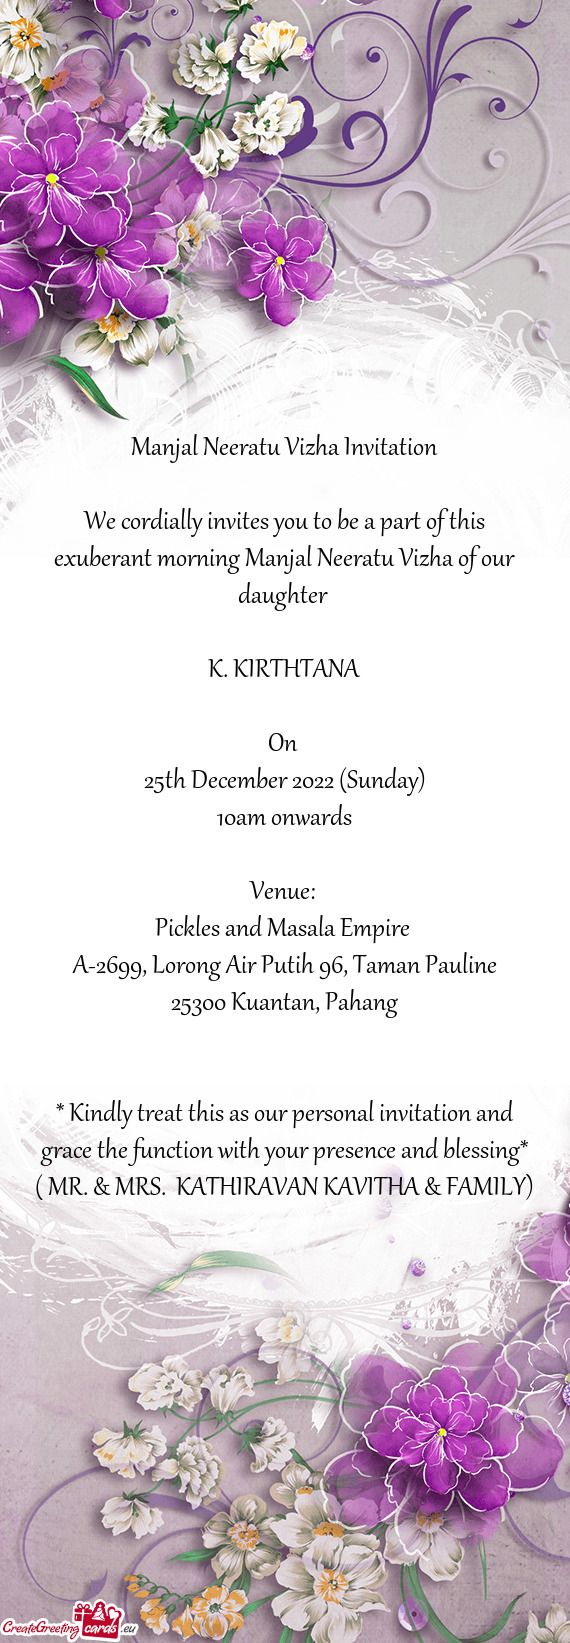 We cordially invites you to be a part of this exuberant morning Manjal Neeratu Vizha of our daughter